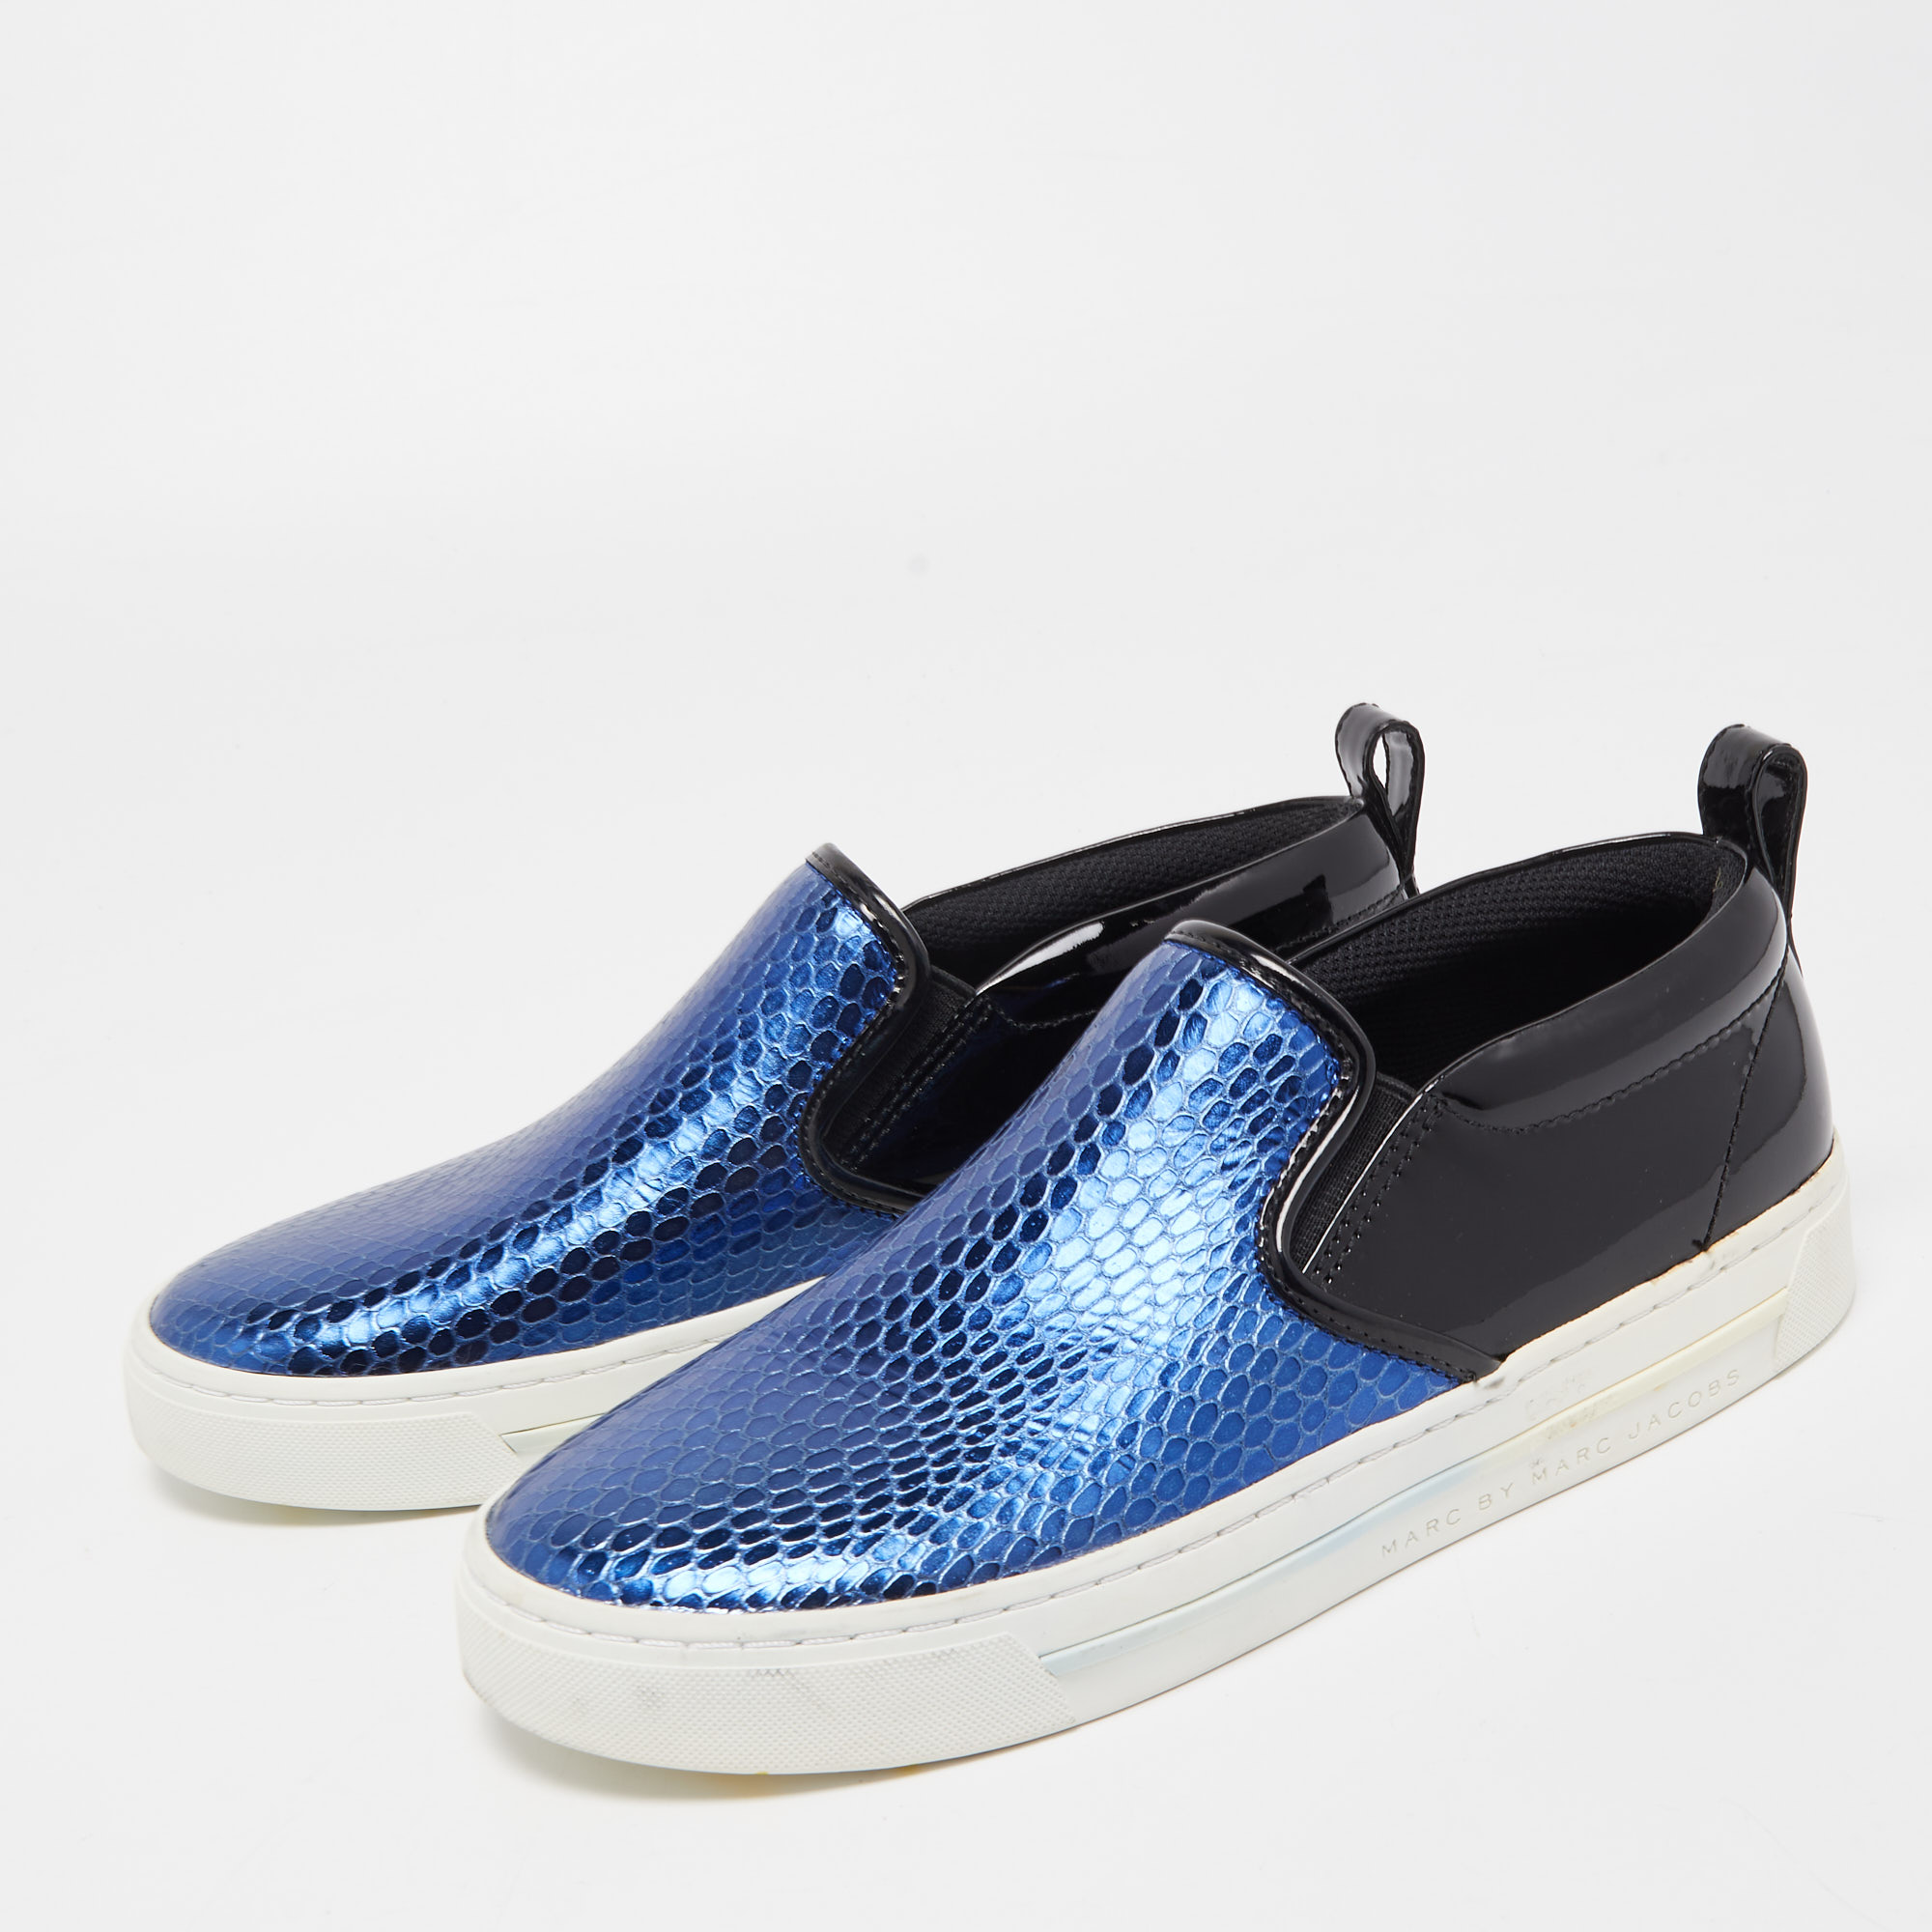 

Marc by Marc Jacobs Blue Python Embossed Leather Broome Slip On Sneakers Size